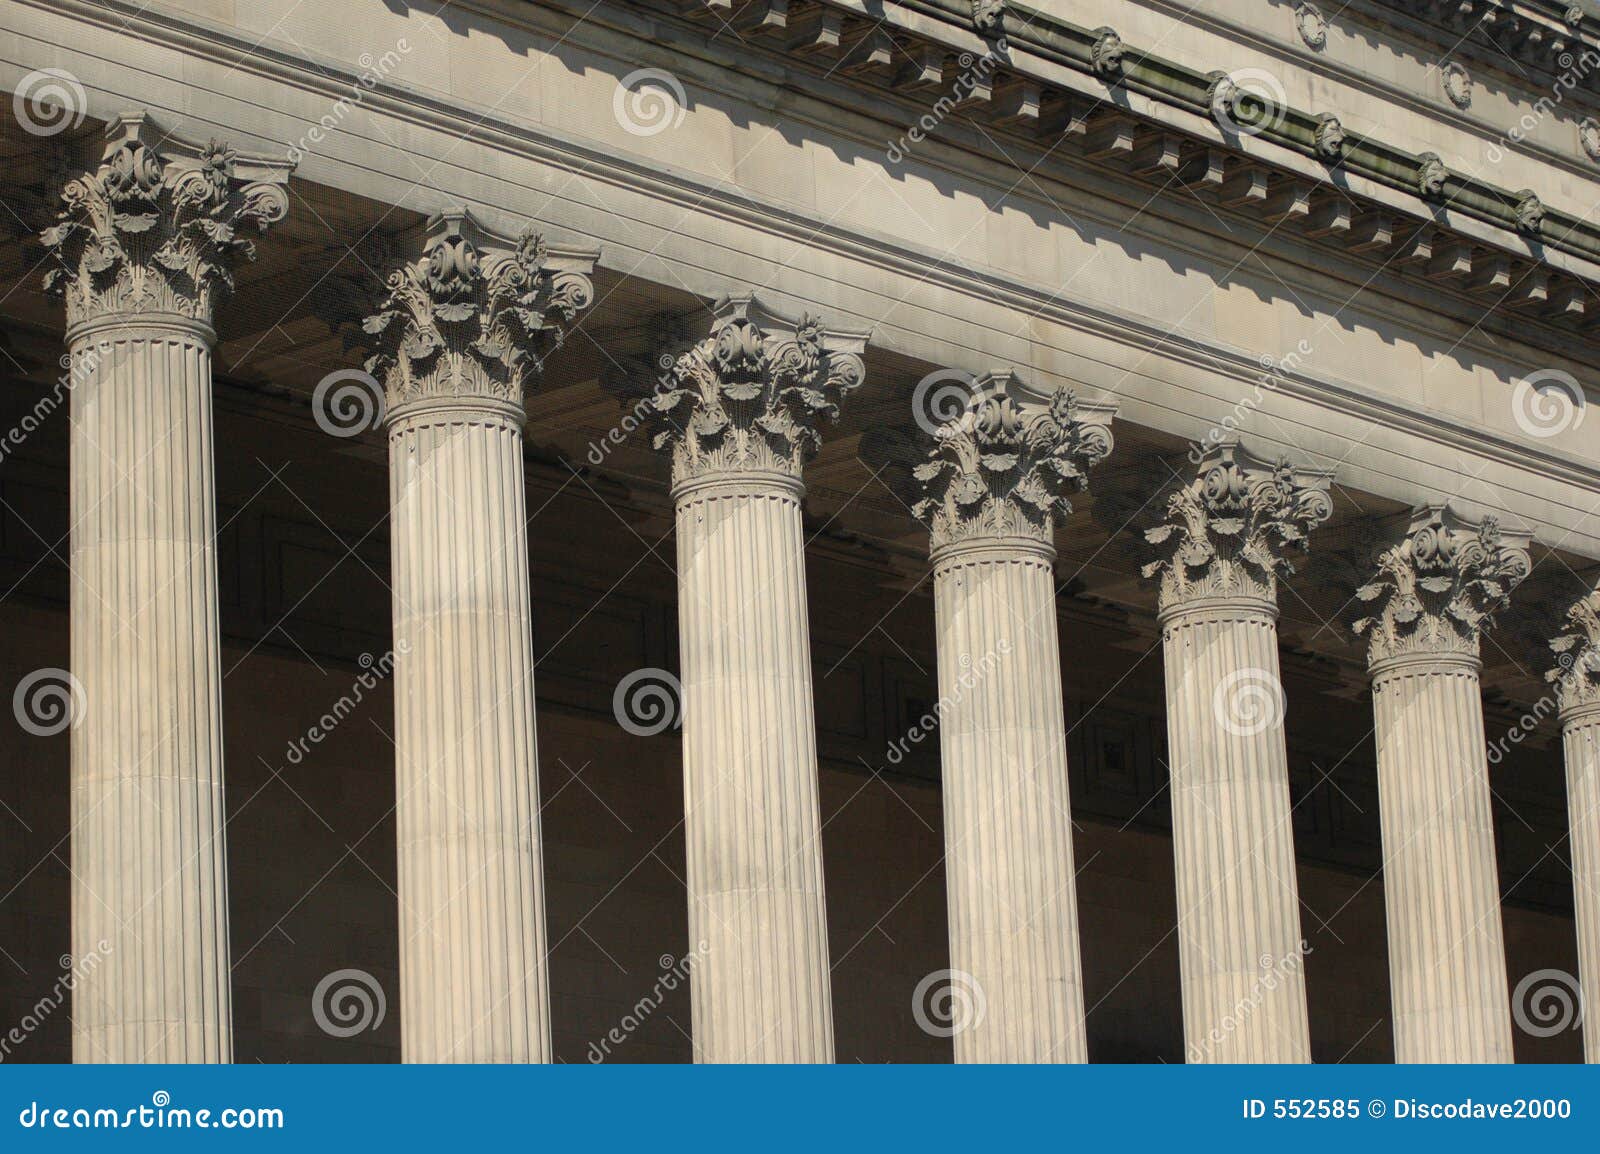 neo classical columns in detail